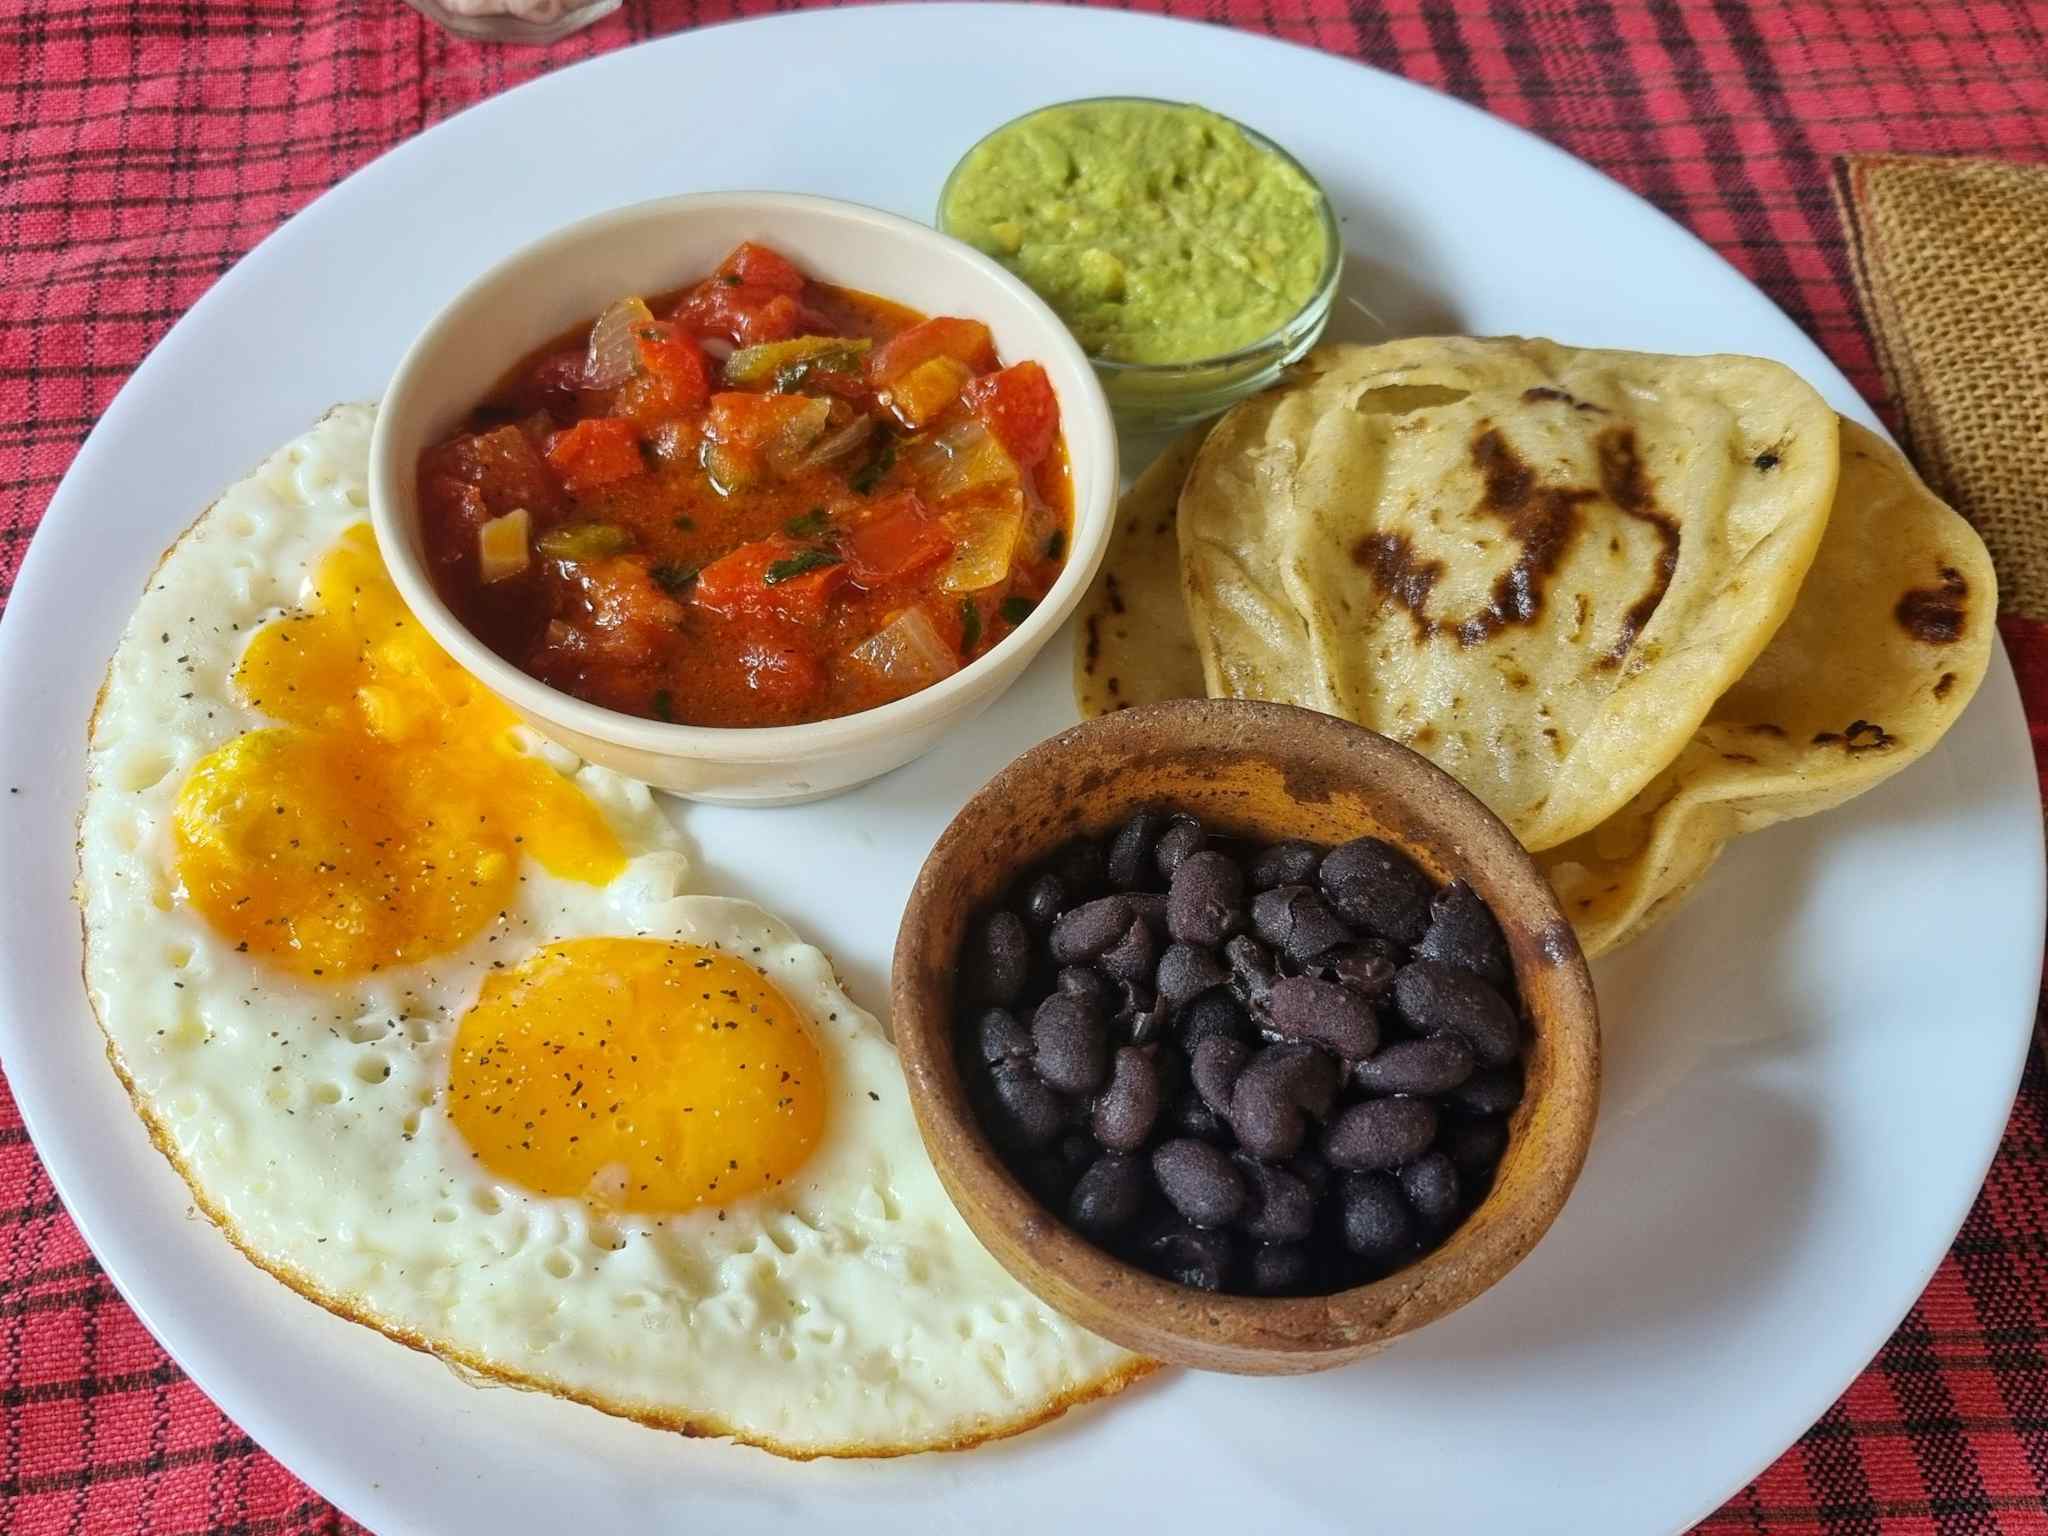 Traditional Guatemalan breakfast of eggs, black beans, & fried plantain with tortillas wrapped in basket on handwoven Maya textile.